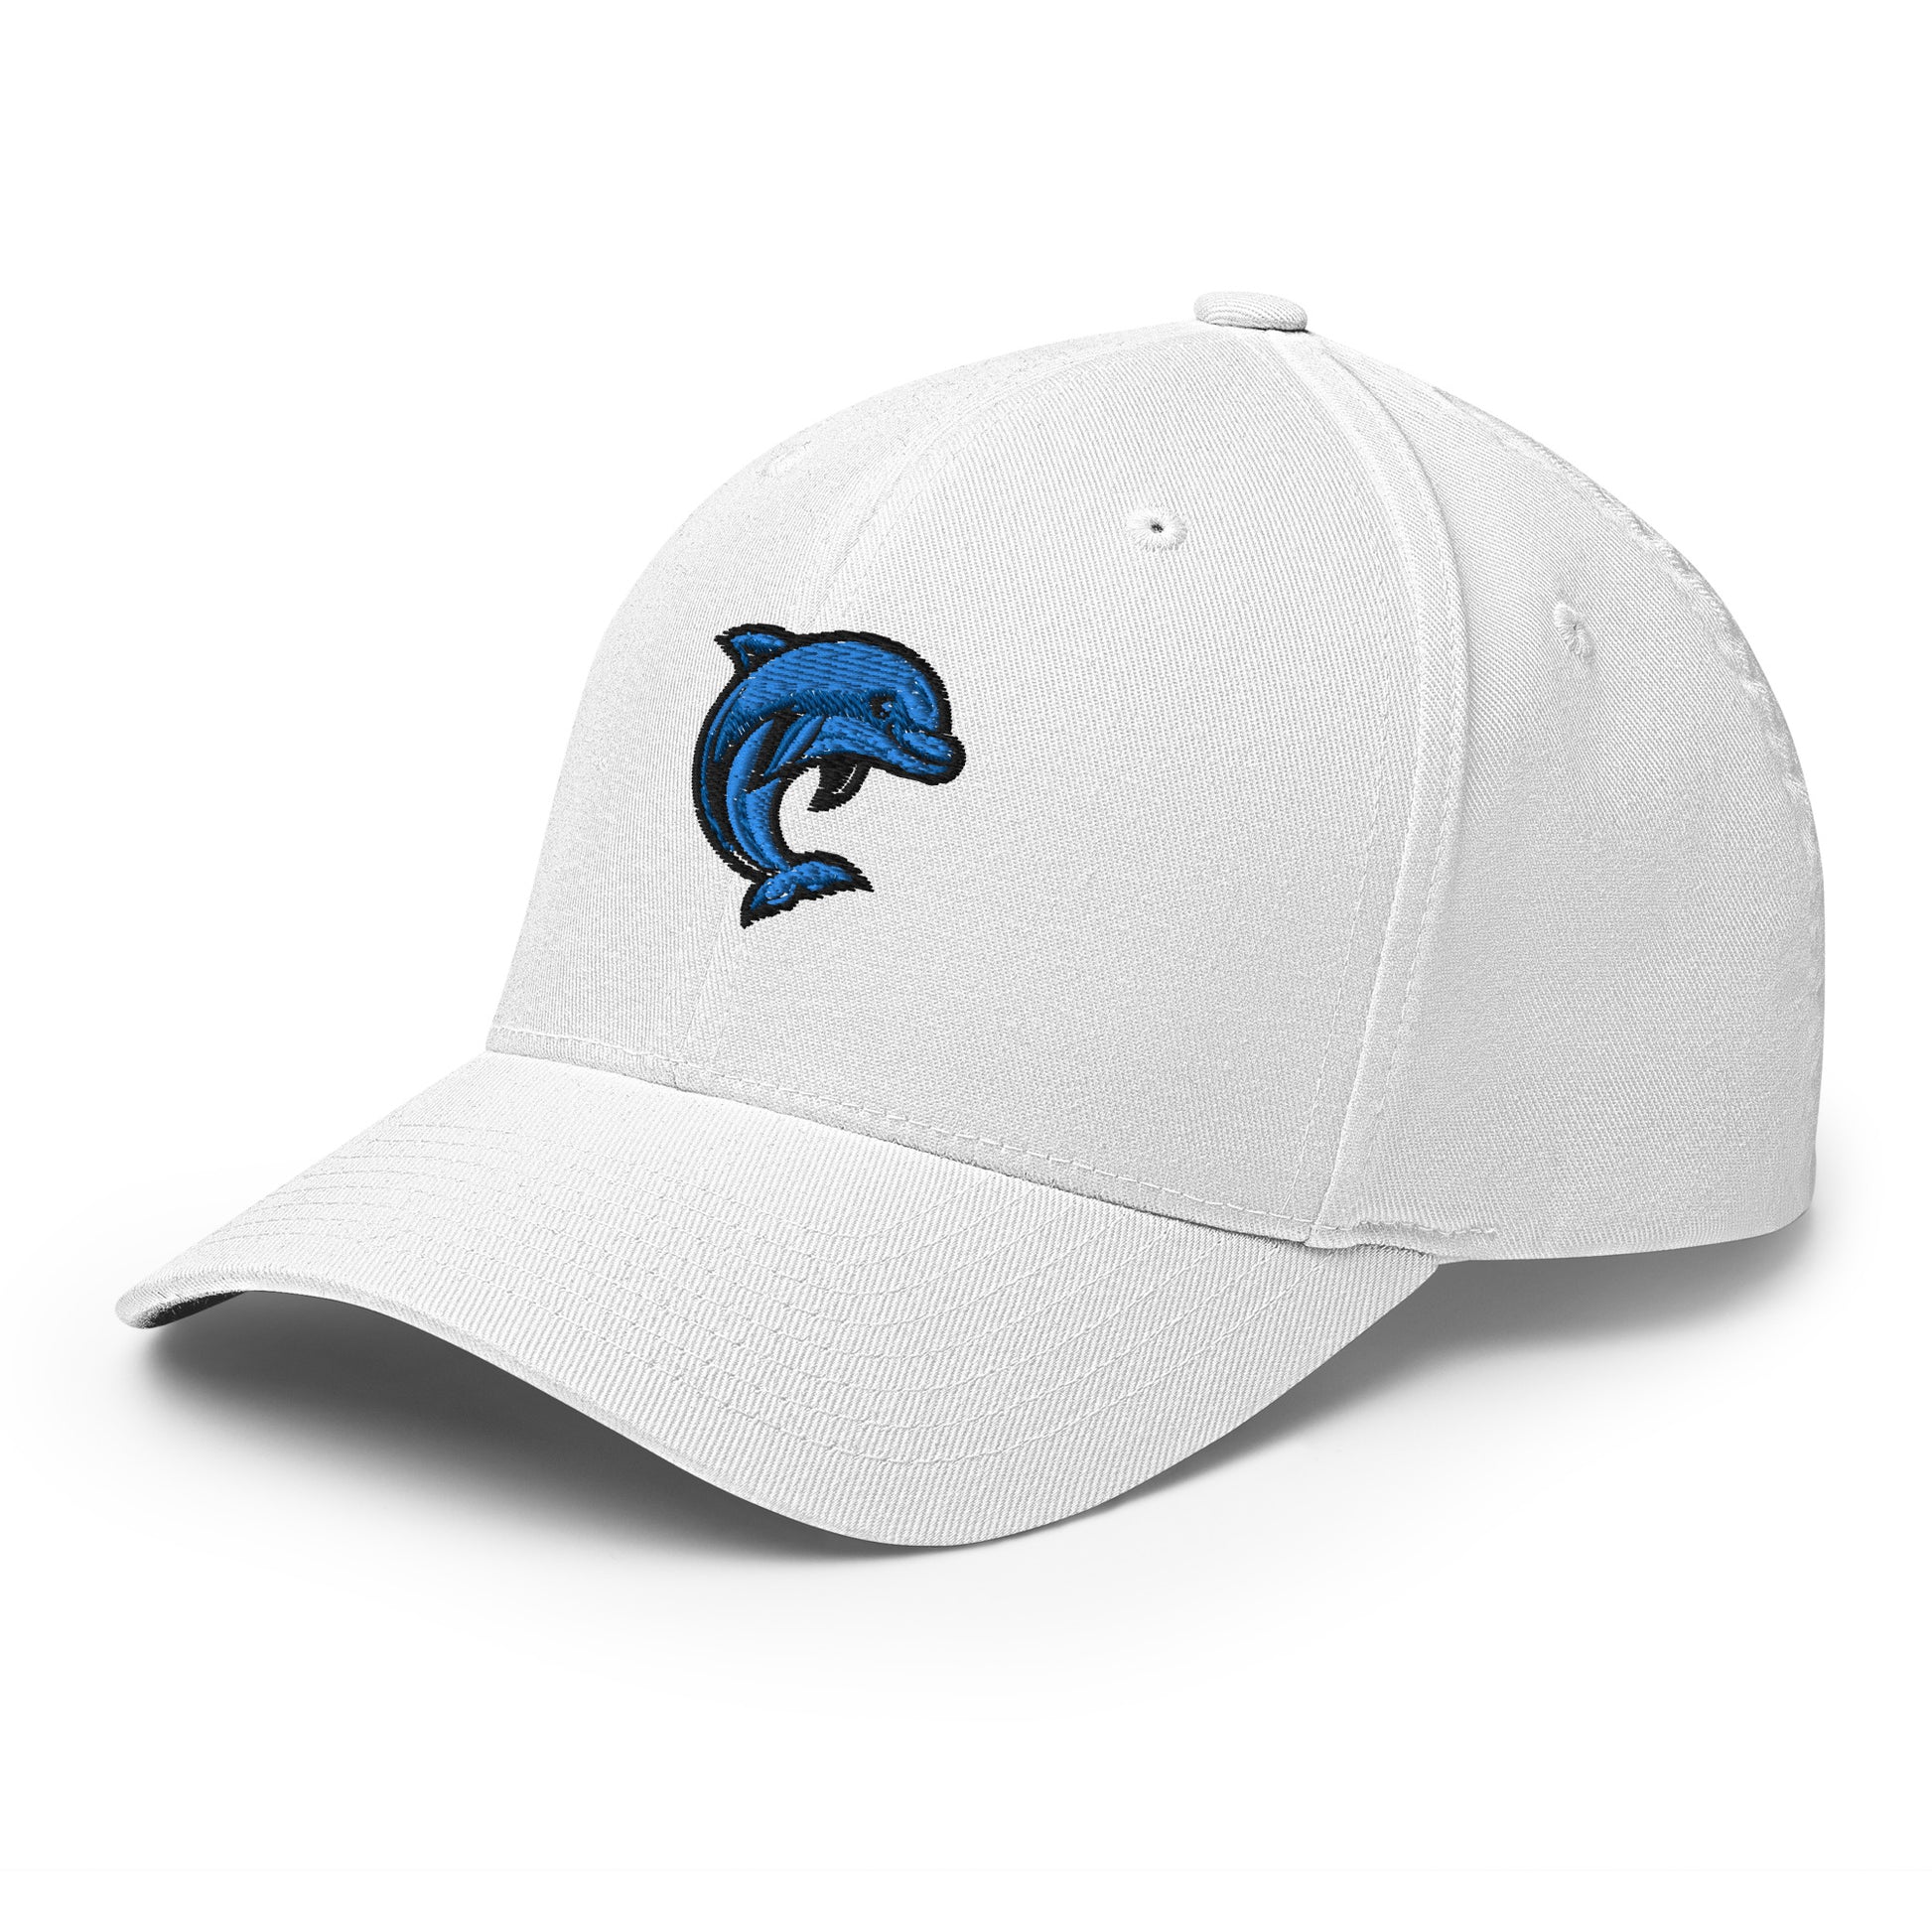 cap-from-the-front-with-dolphin-symbol